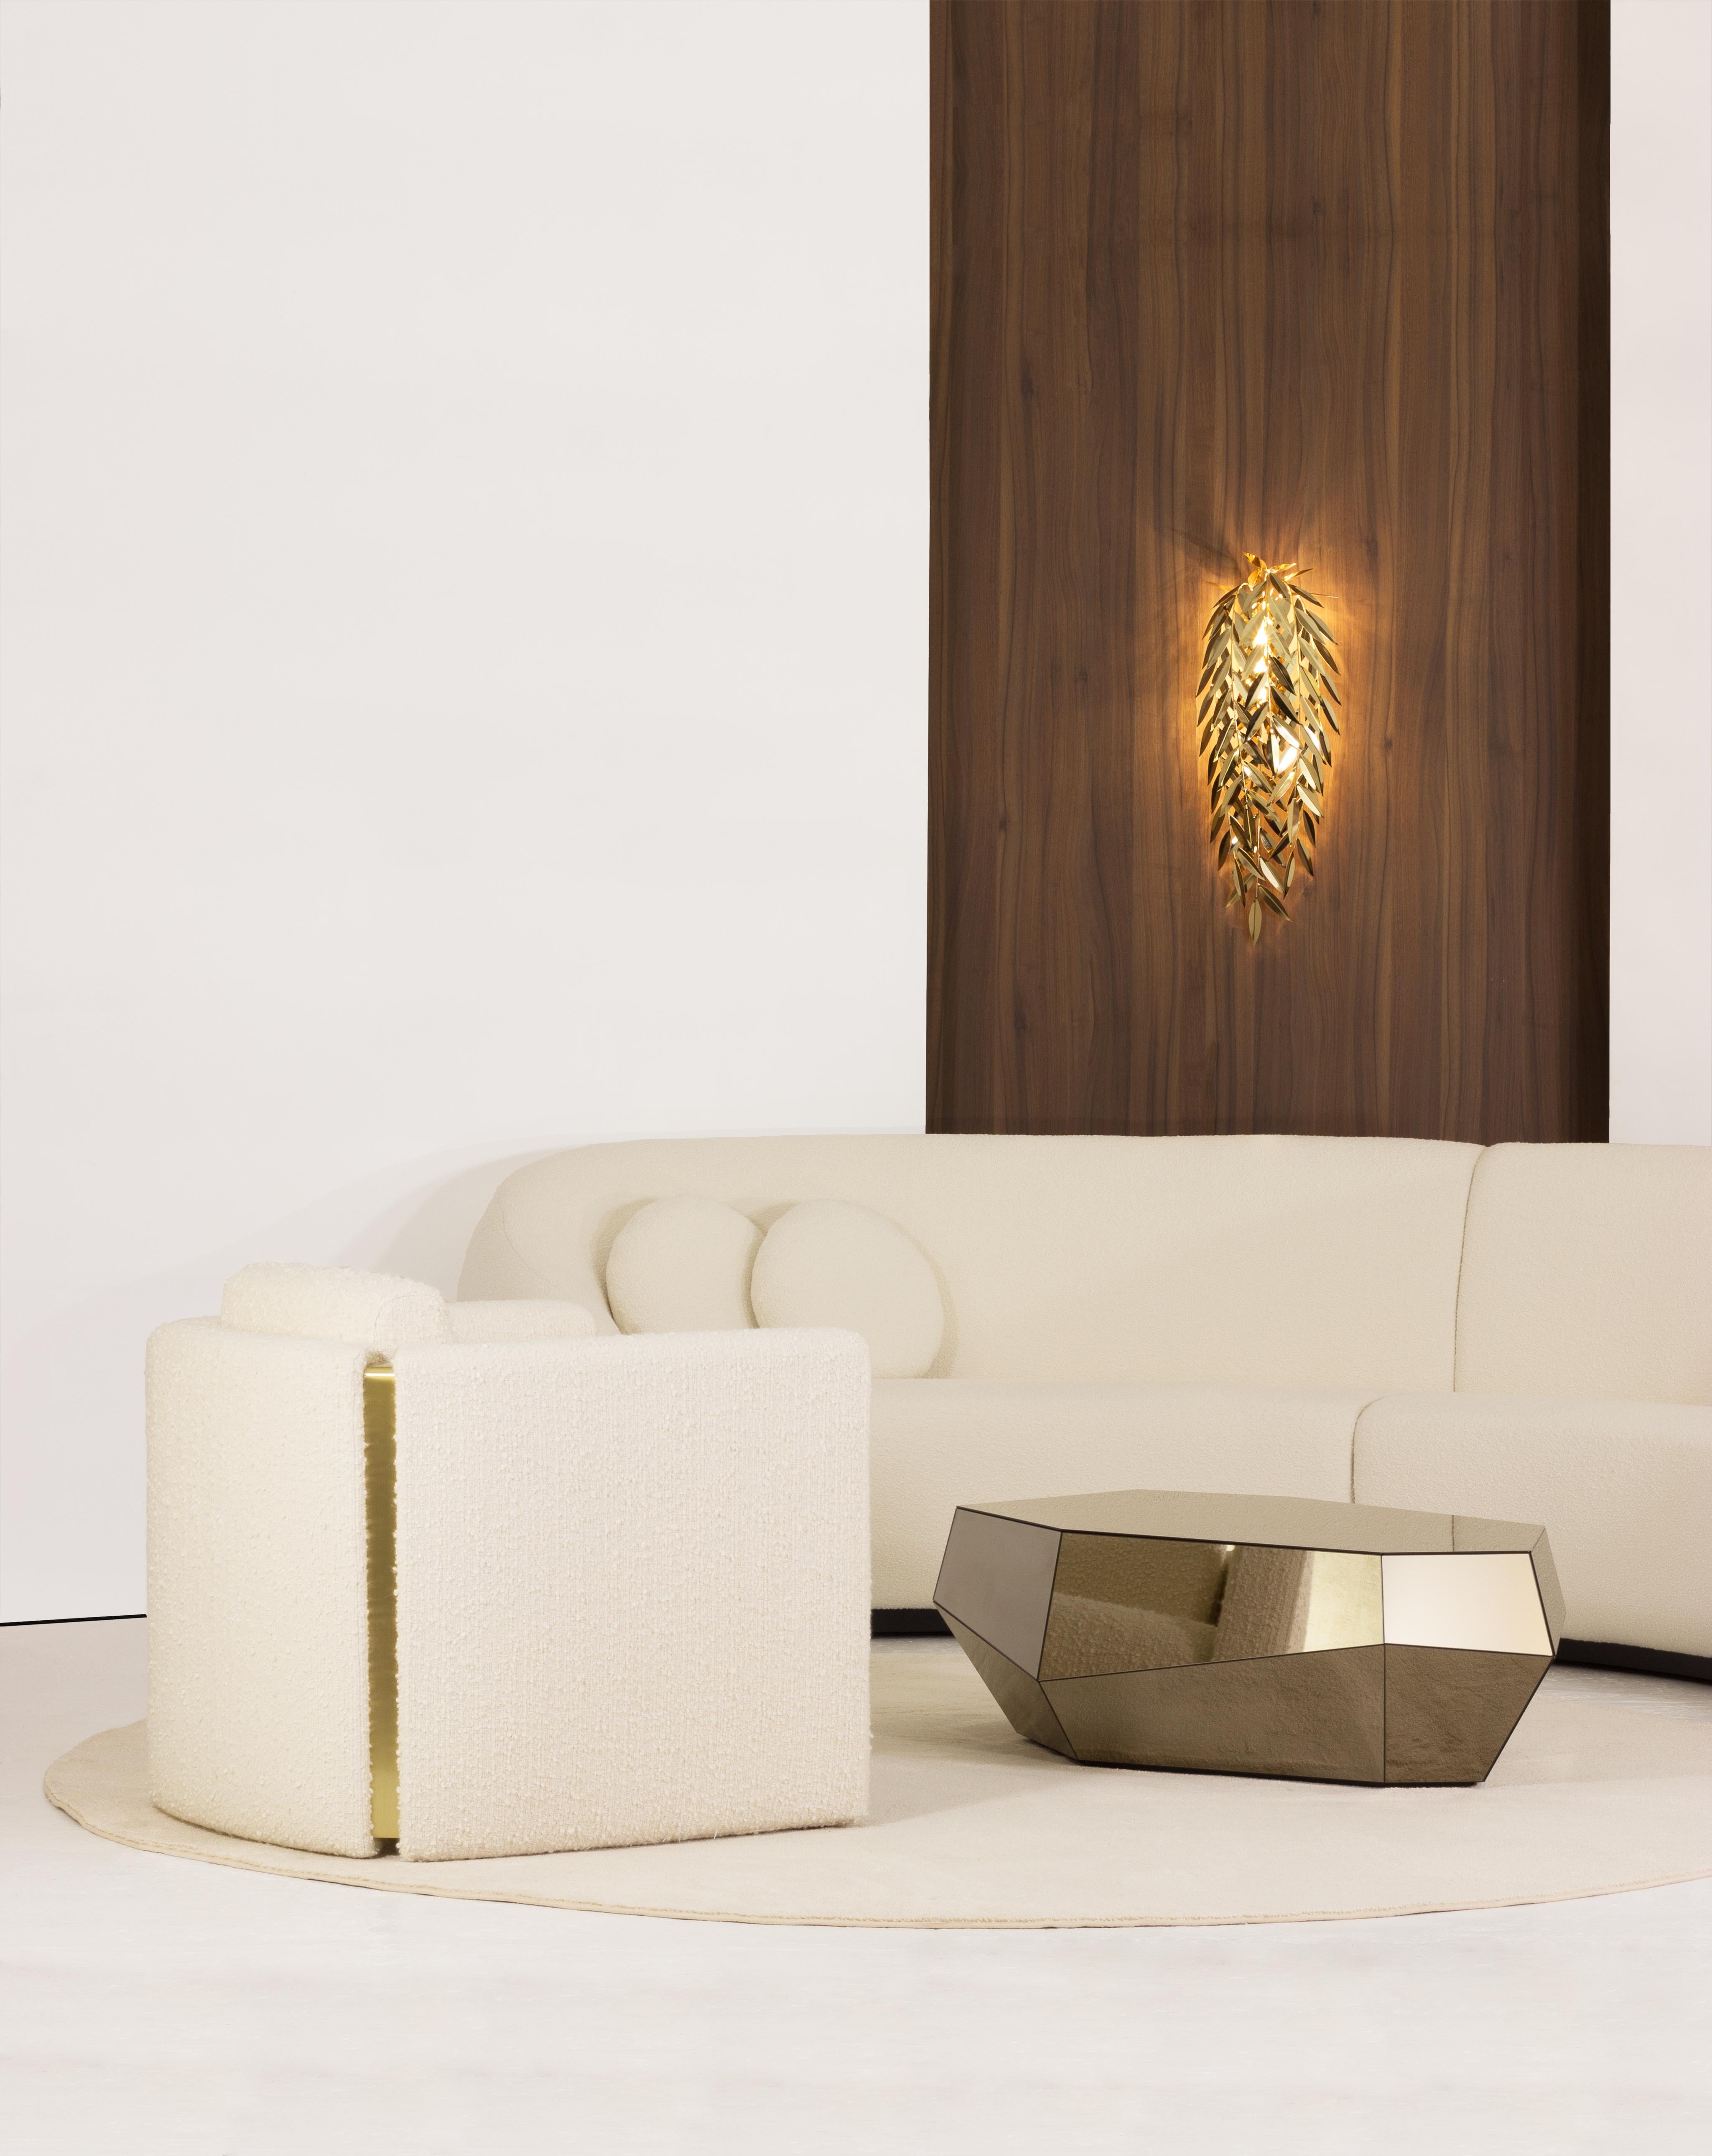 Azores Wall Lamp, Polished Gold, InsidherLand by Joana Santos Barbosa For Sale 1